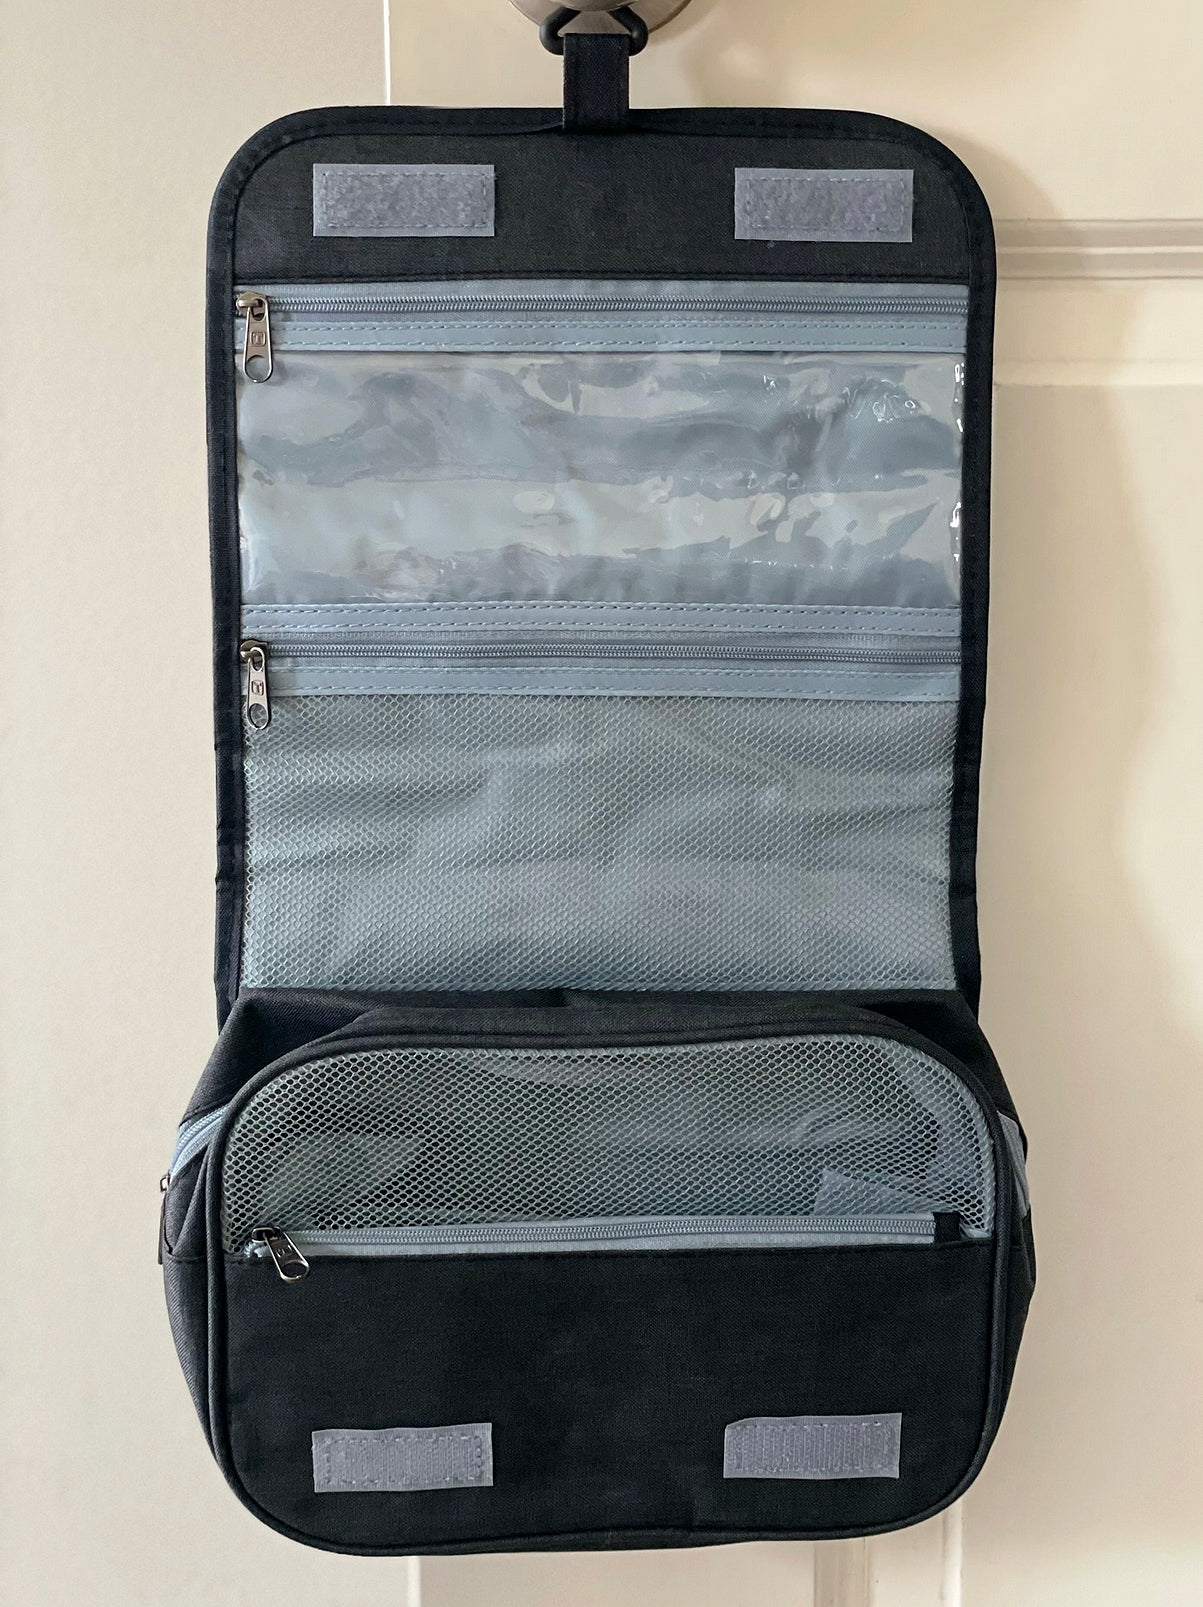 Mommy Grab-n-Go Bag Toiletry Bag Only (No Essentials)